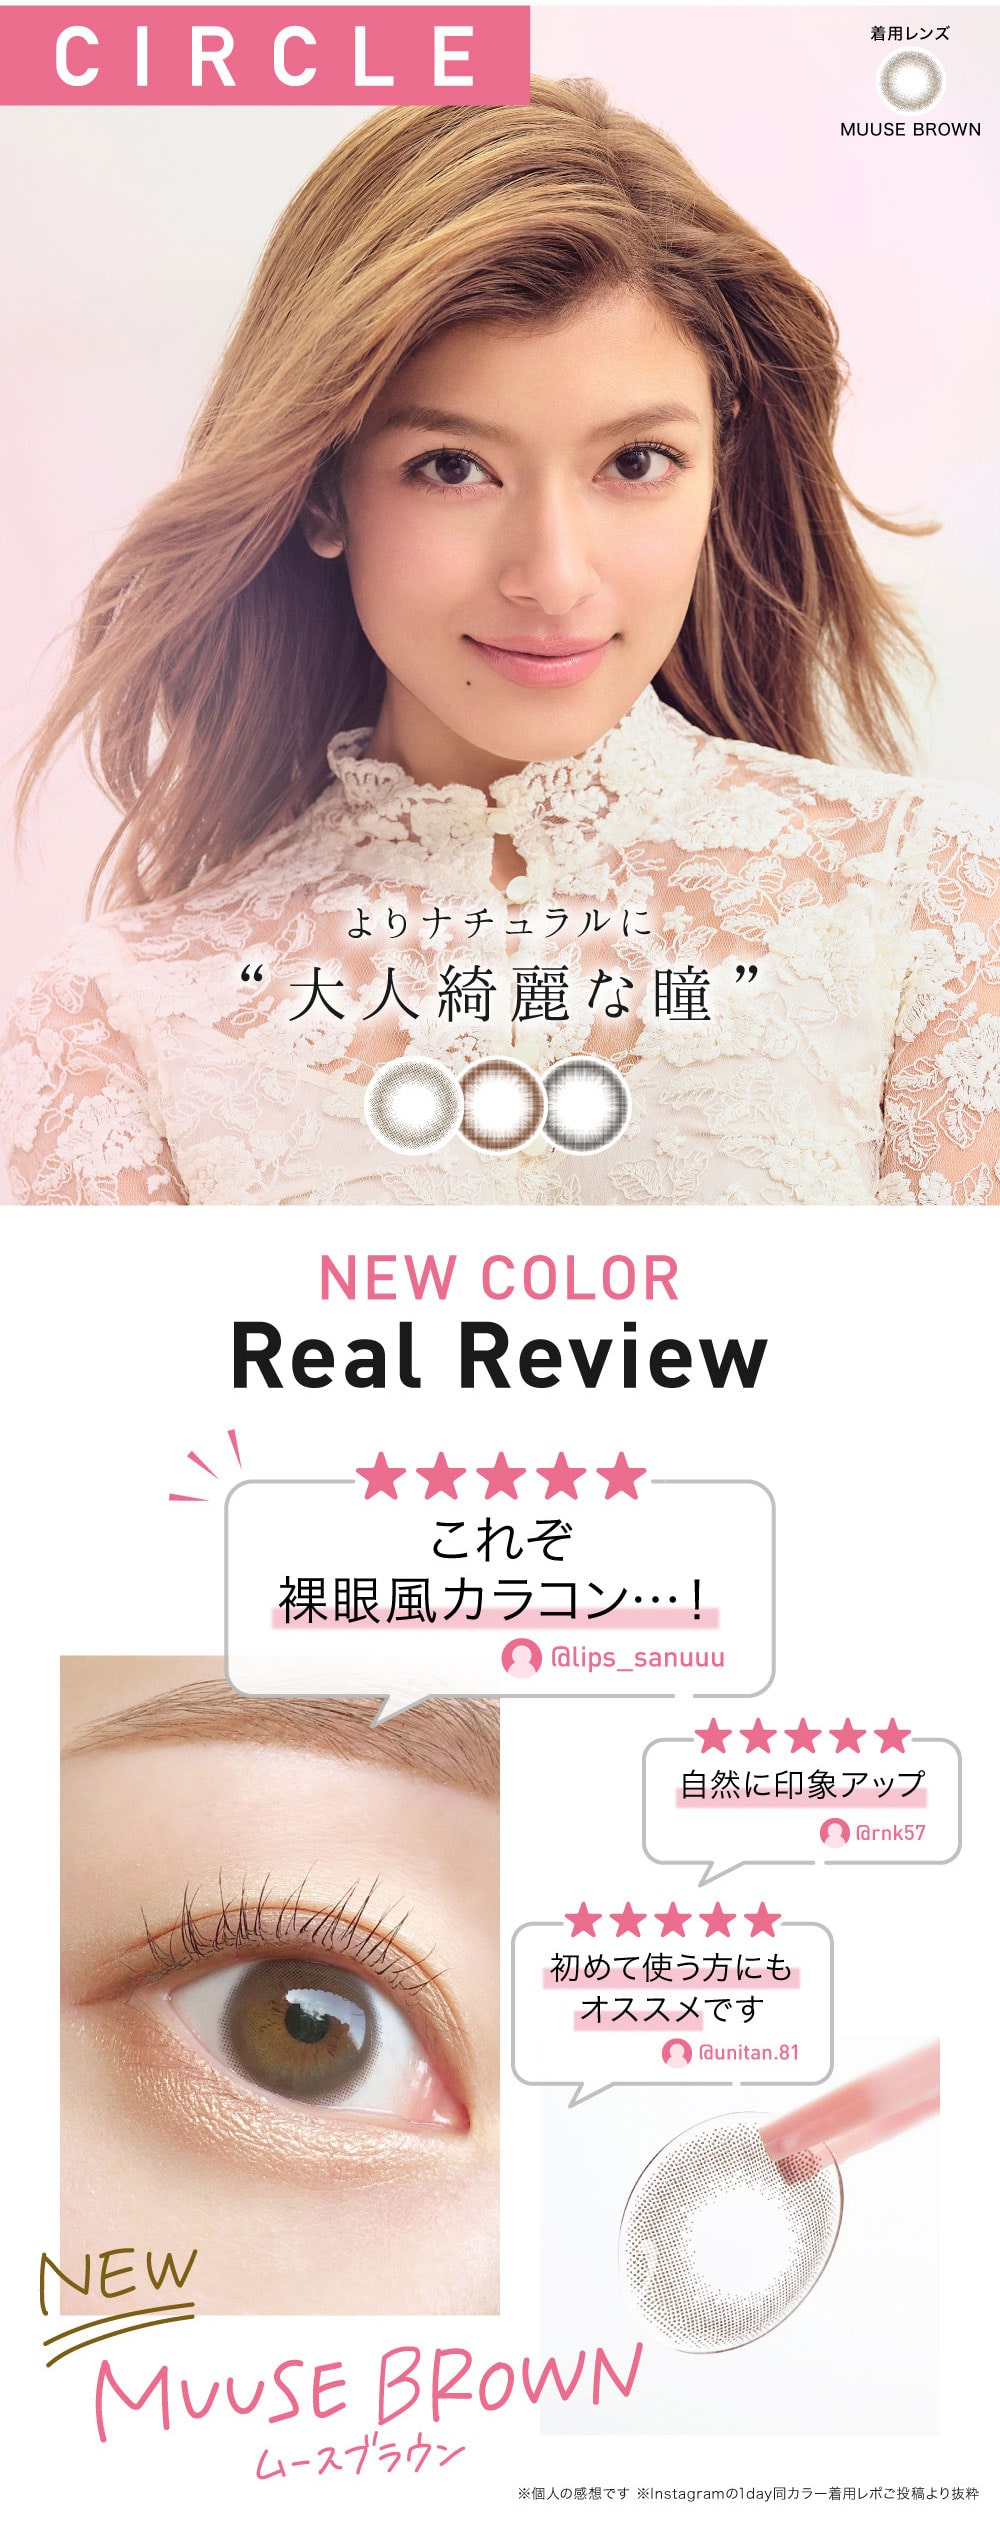 ReVIA 1month color レヴィア ワンマンス カラー real review